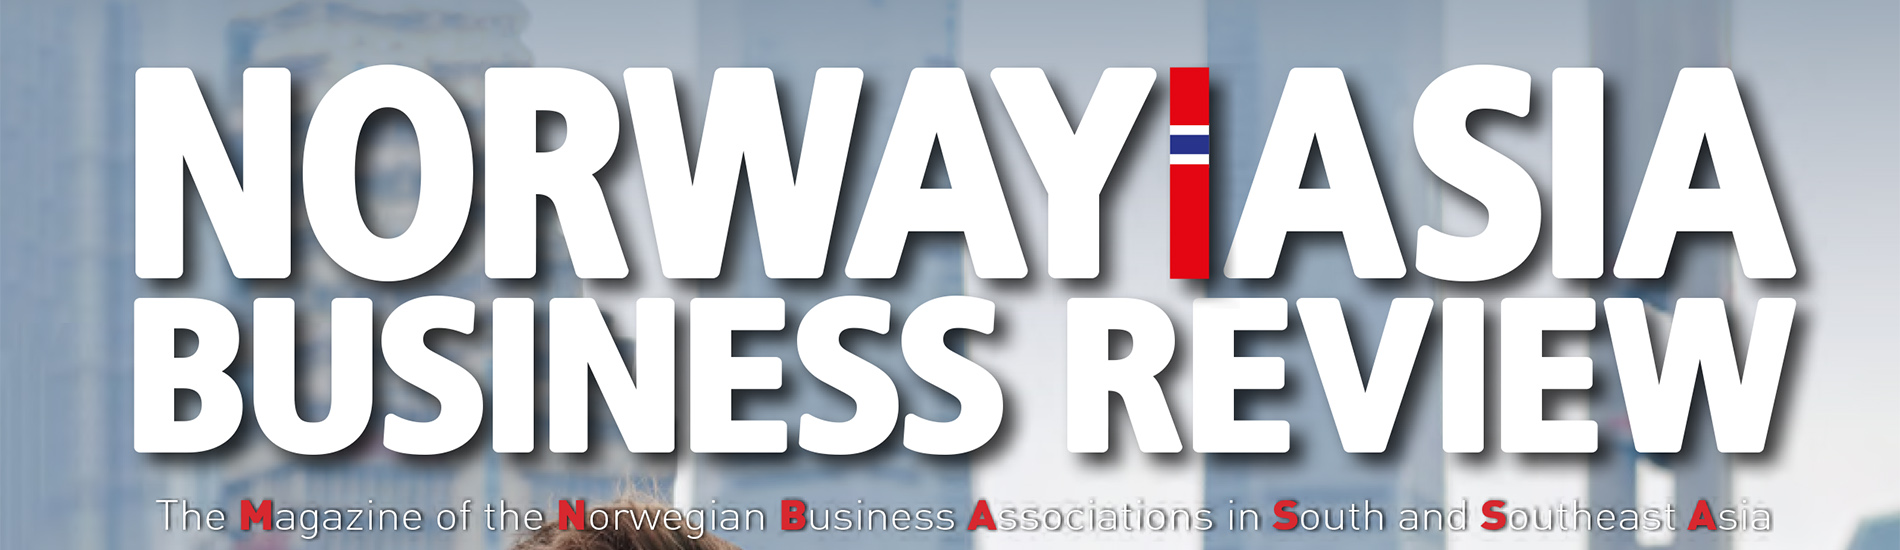 First Issue of Norway-Asia Business Review 2020 Published